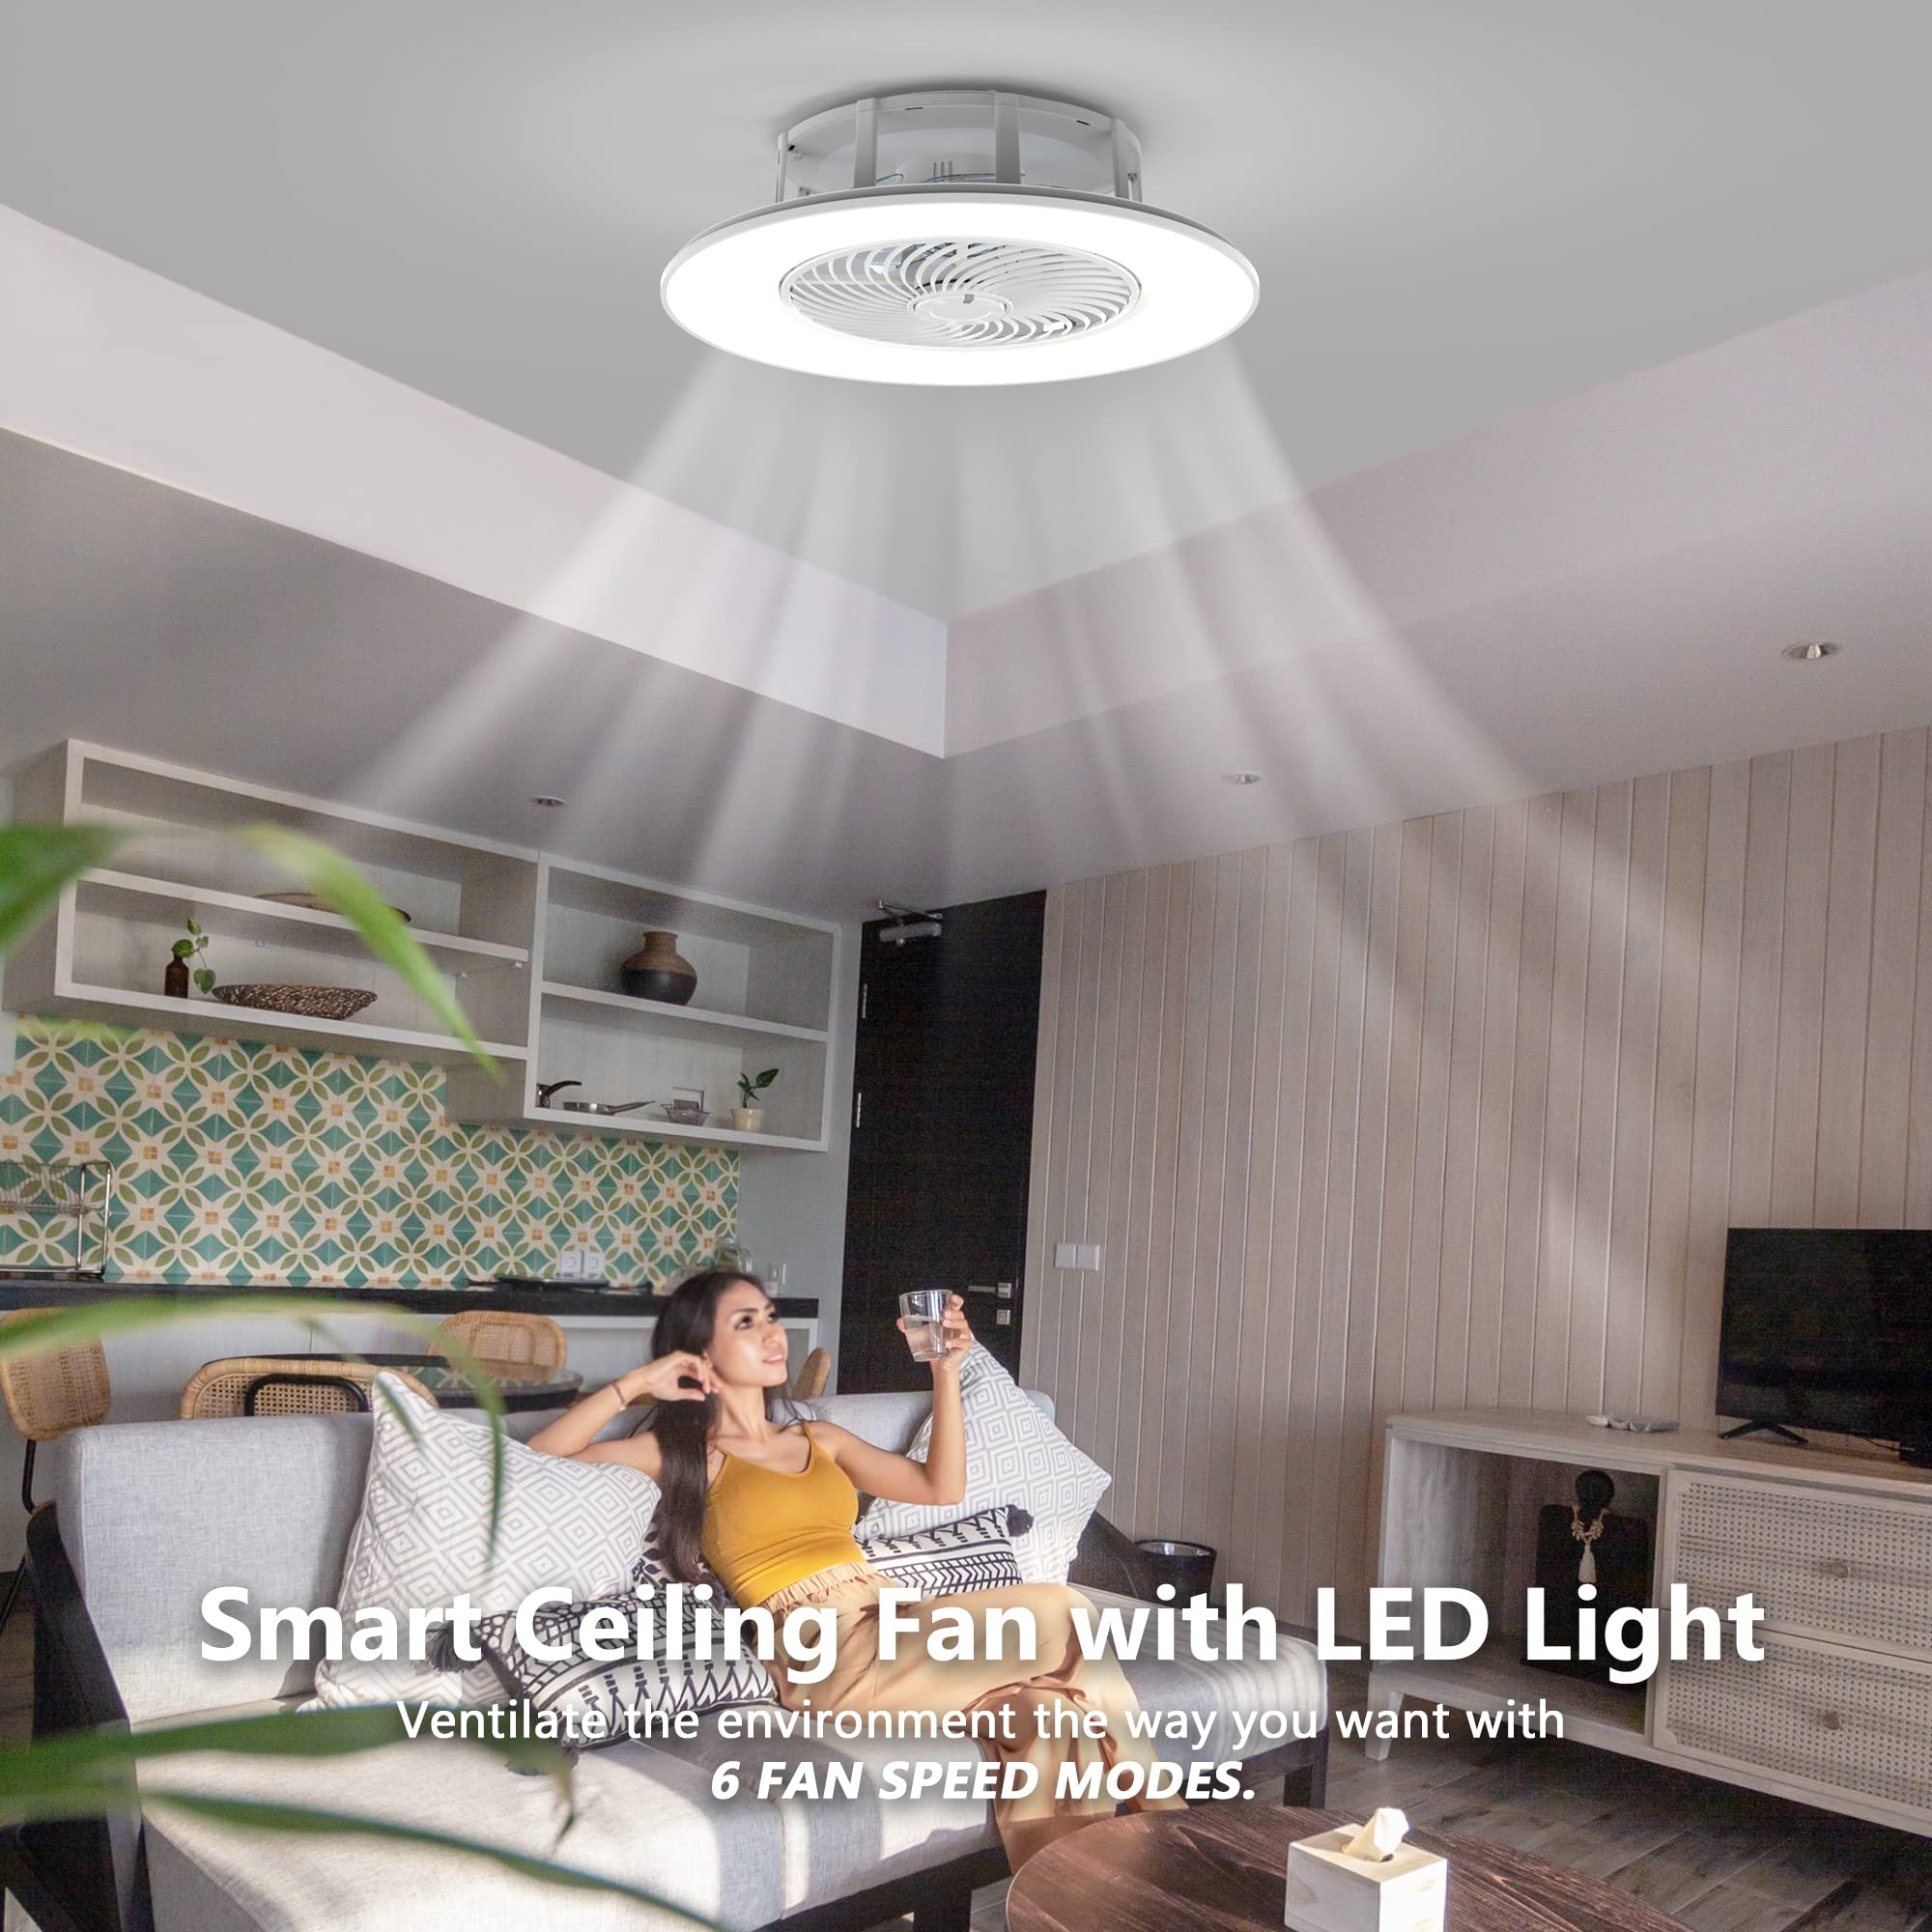 PrimeMall Bladeless Ceiling Fan with Light and Remote Control 22